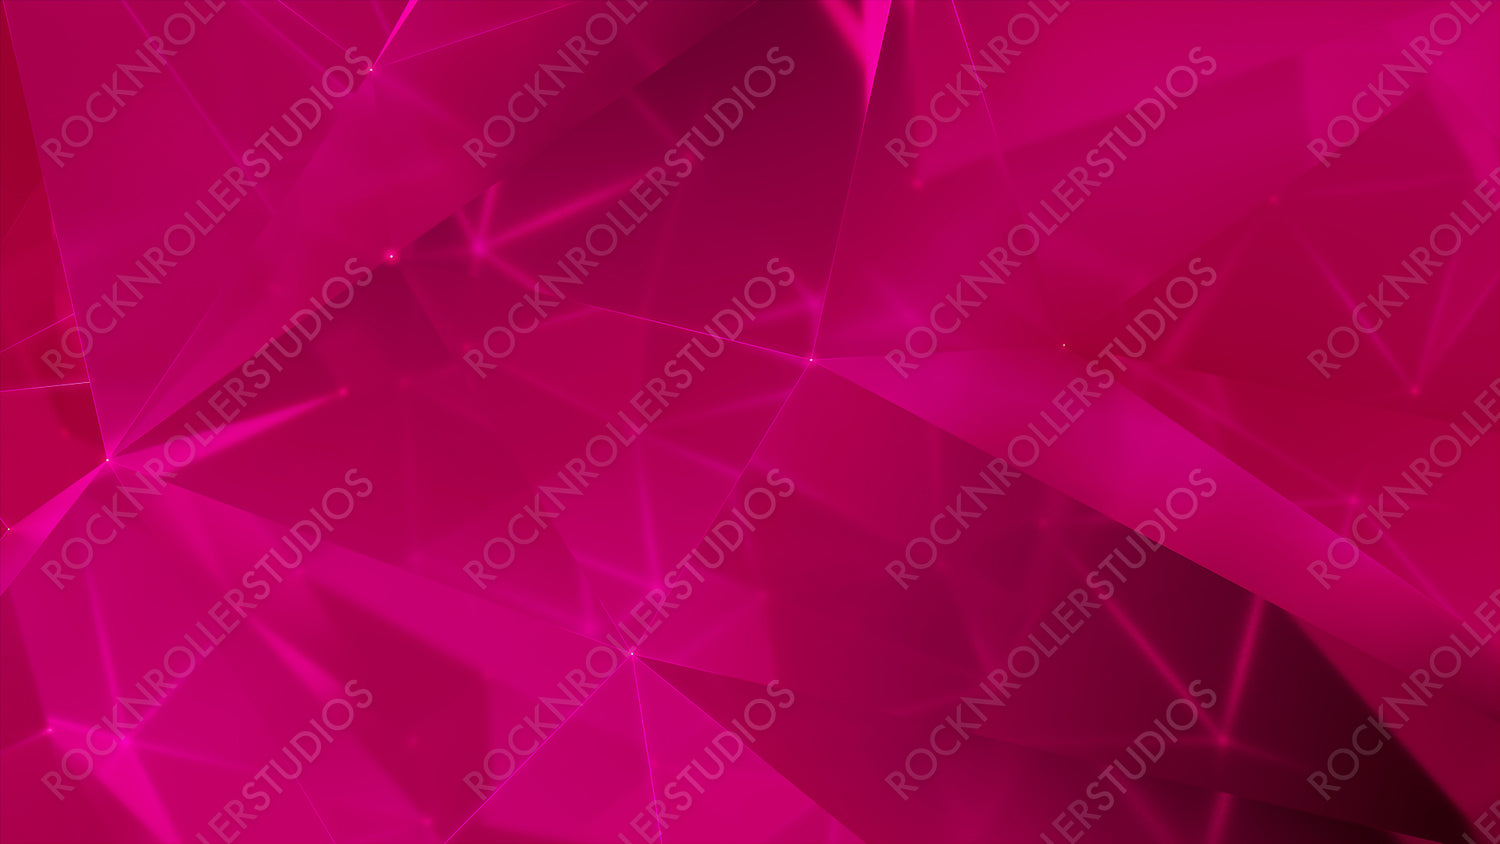 Global Data Web Communication Network in Cyberspace Pink Tech Background. 3D Render. 